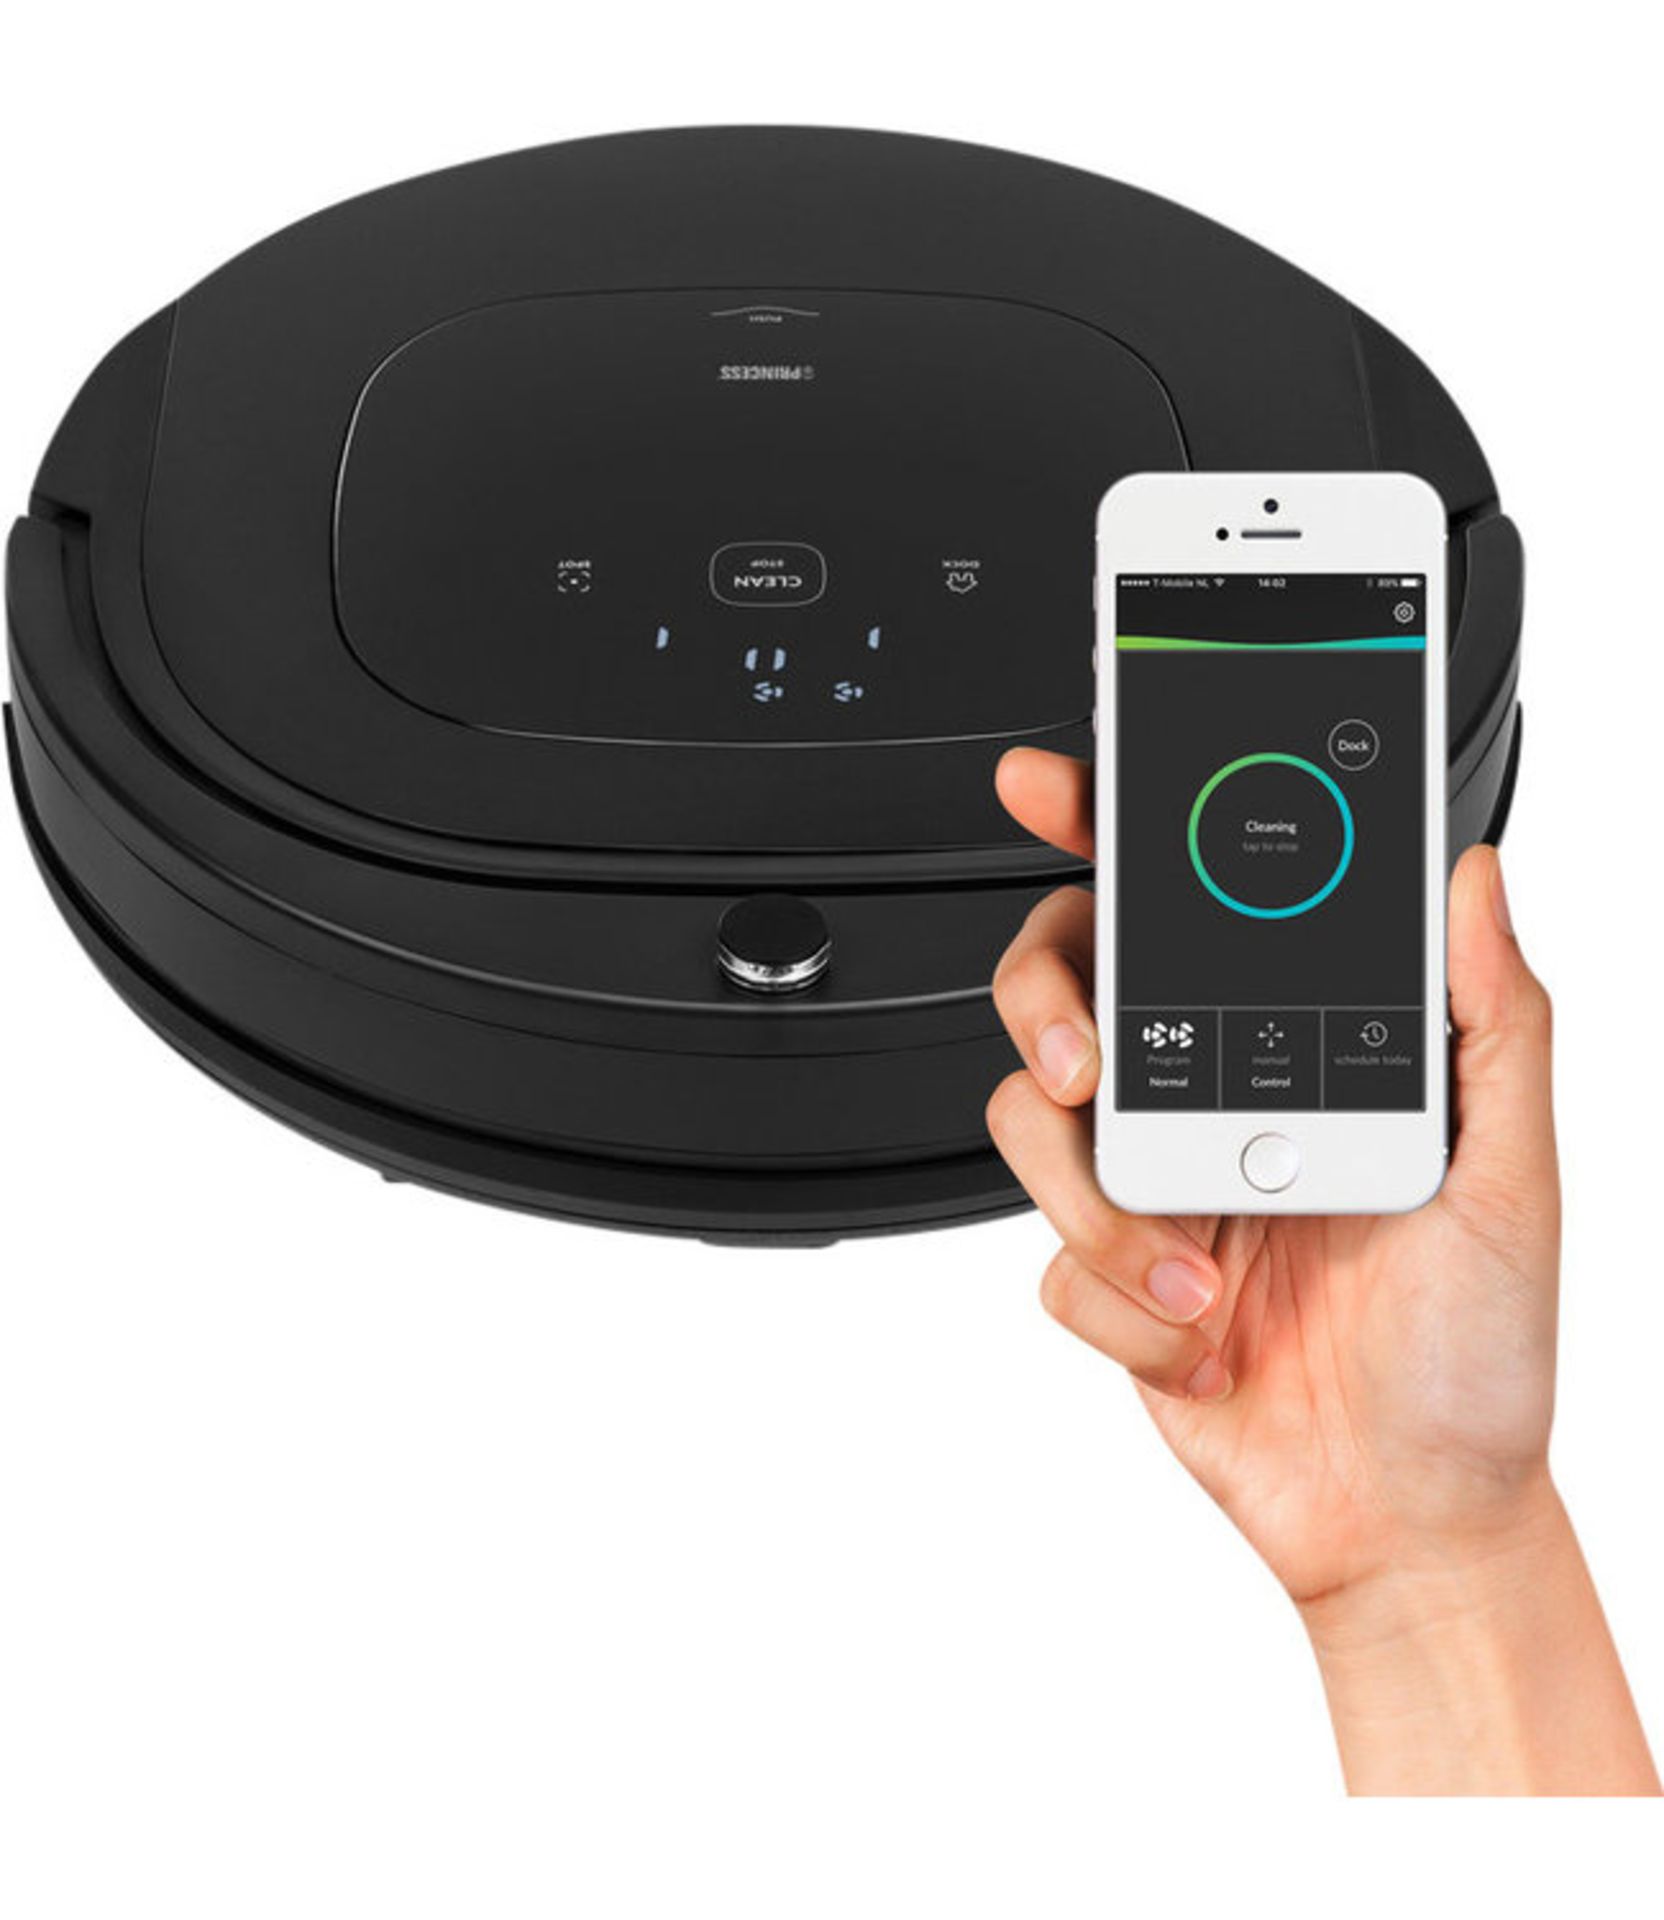 3 x Princess 339000 Deluxe Smart Robot Vacuum Cleaner, App and Smart Control, Black. RRP £349.99 - Image 2 of 2